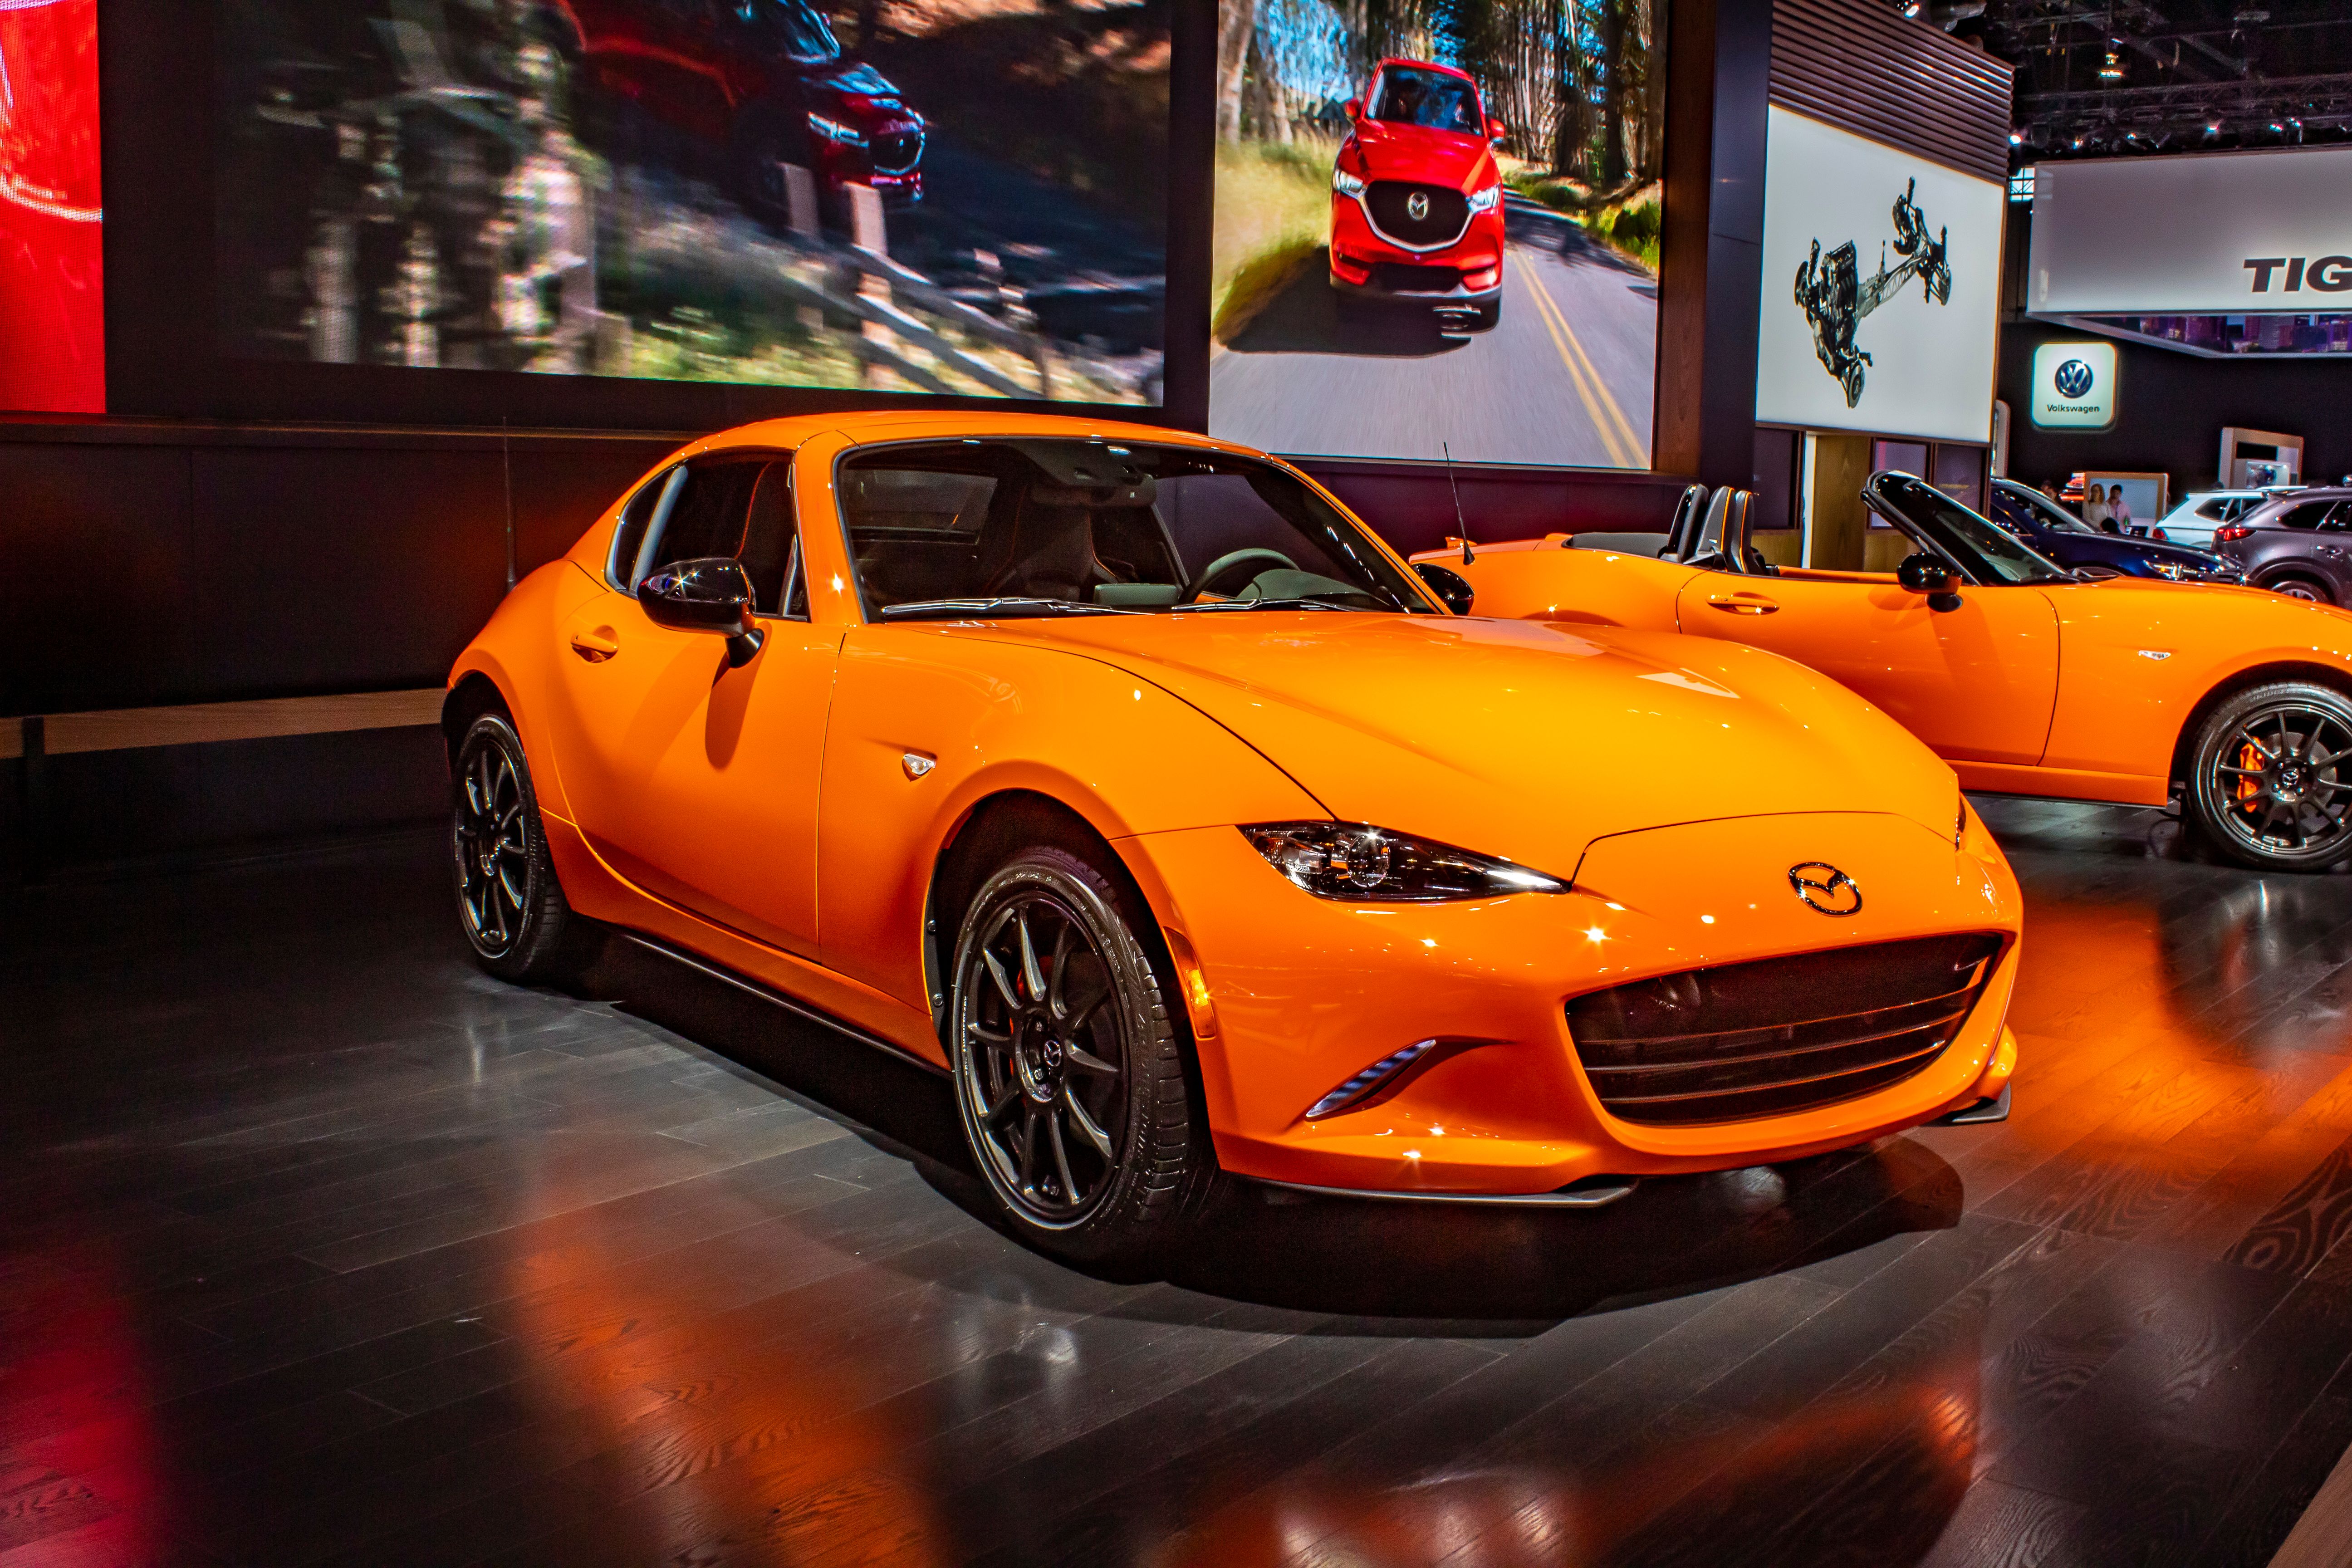 2019 The Mazda MX-5 Miata 30th Anniversary Edition Proves that the U.S. Market Remains a Hotbed for Special Edition Models